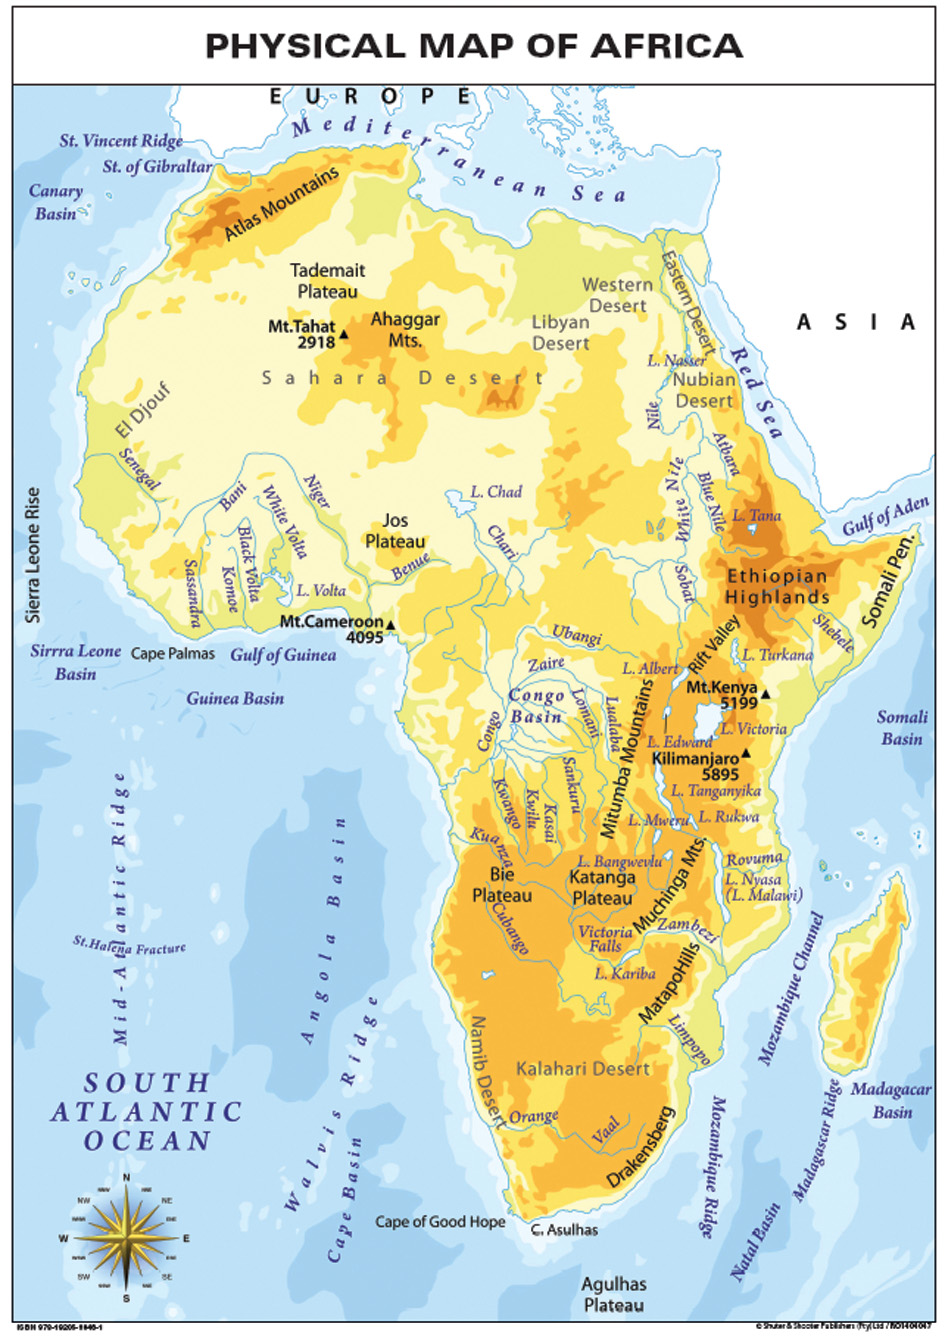 CHART: PHYSICAL MAP OF AFRICA A1 Cover